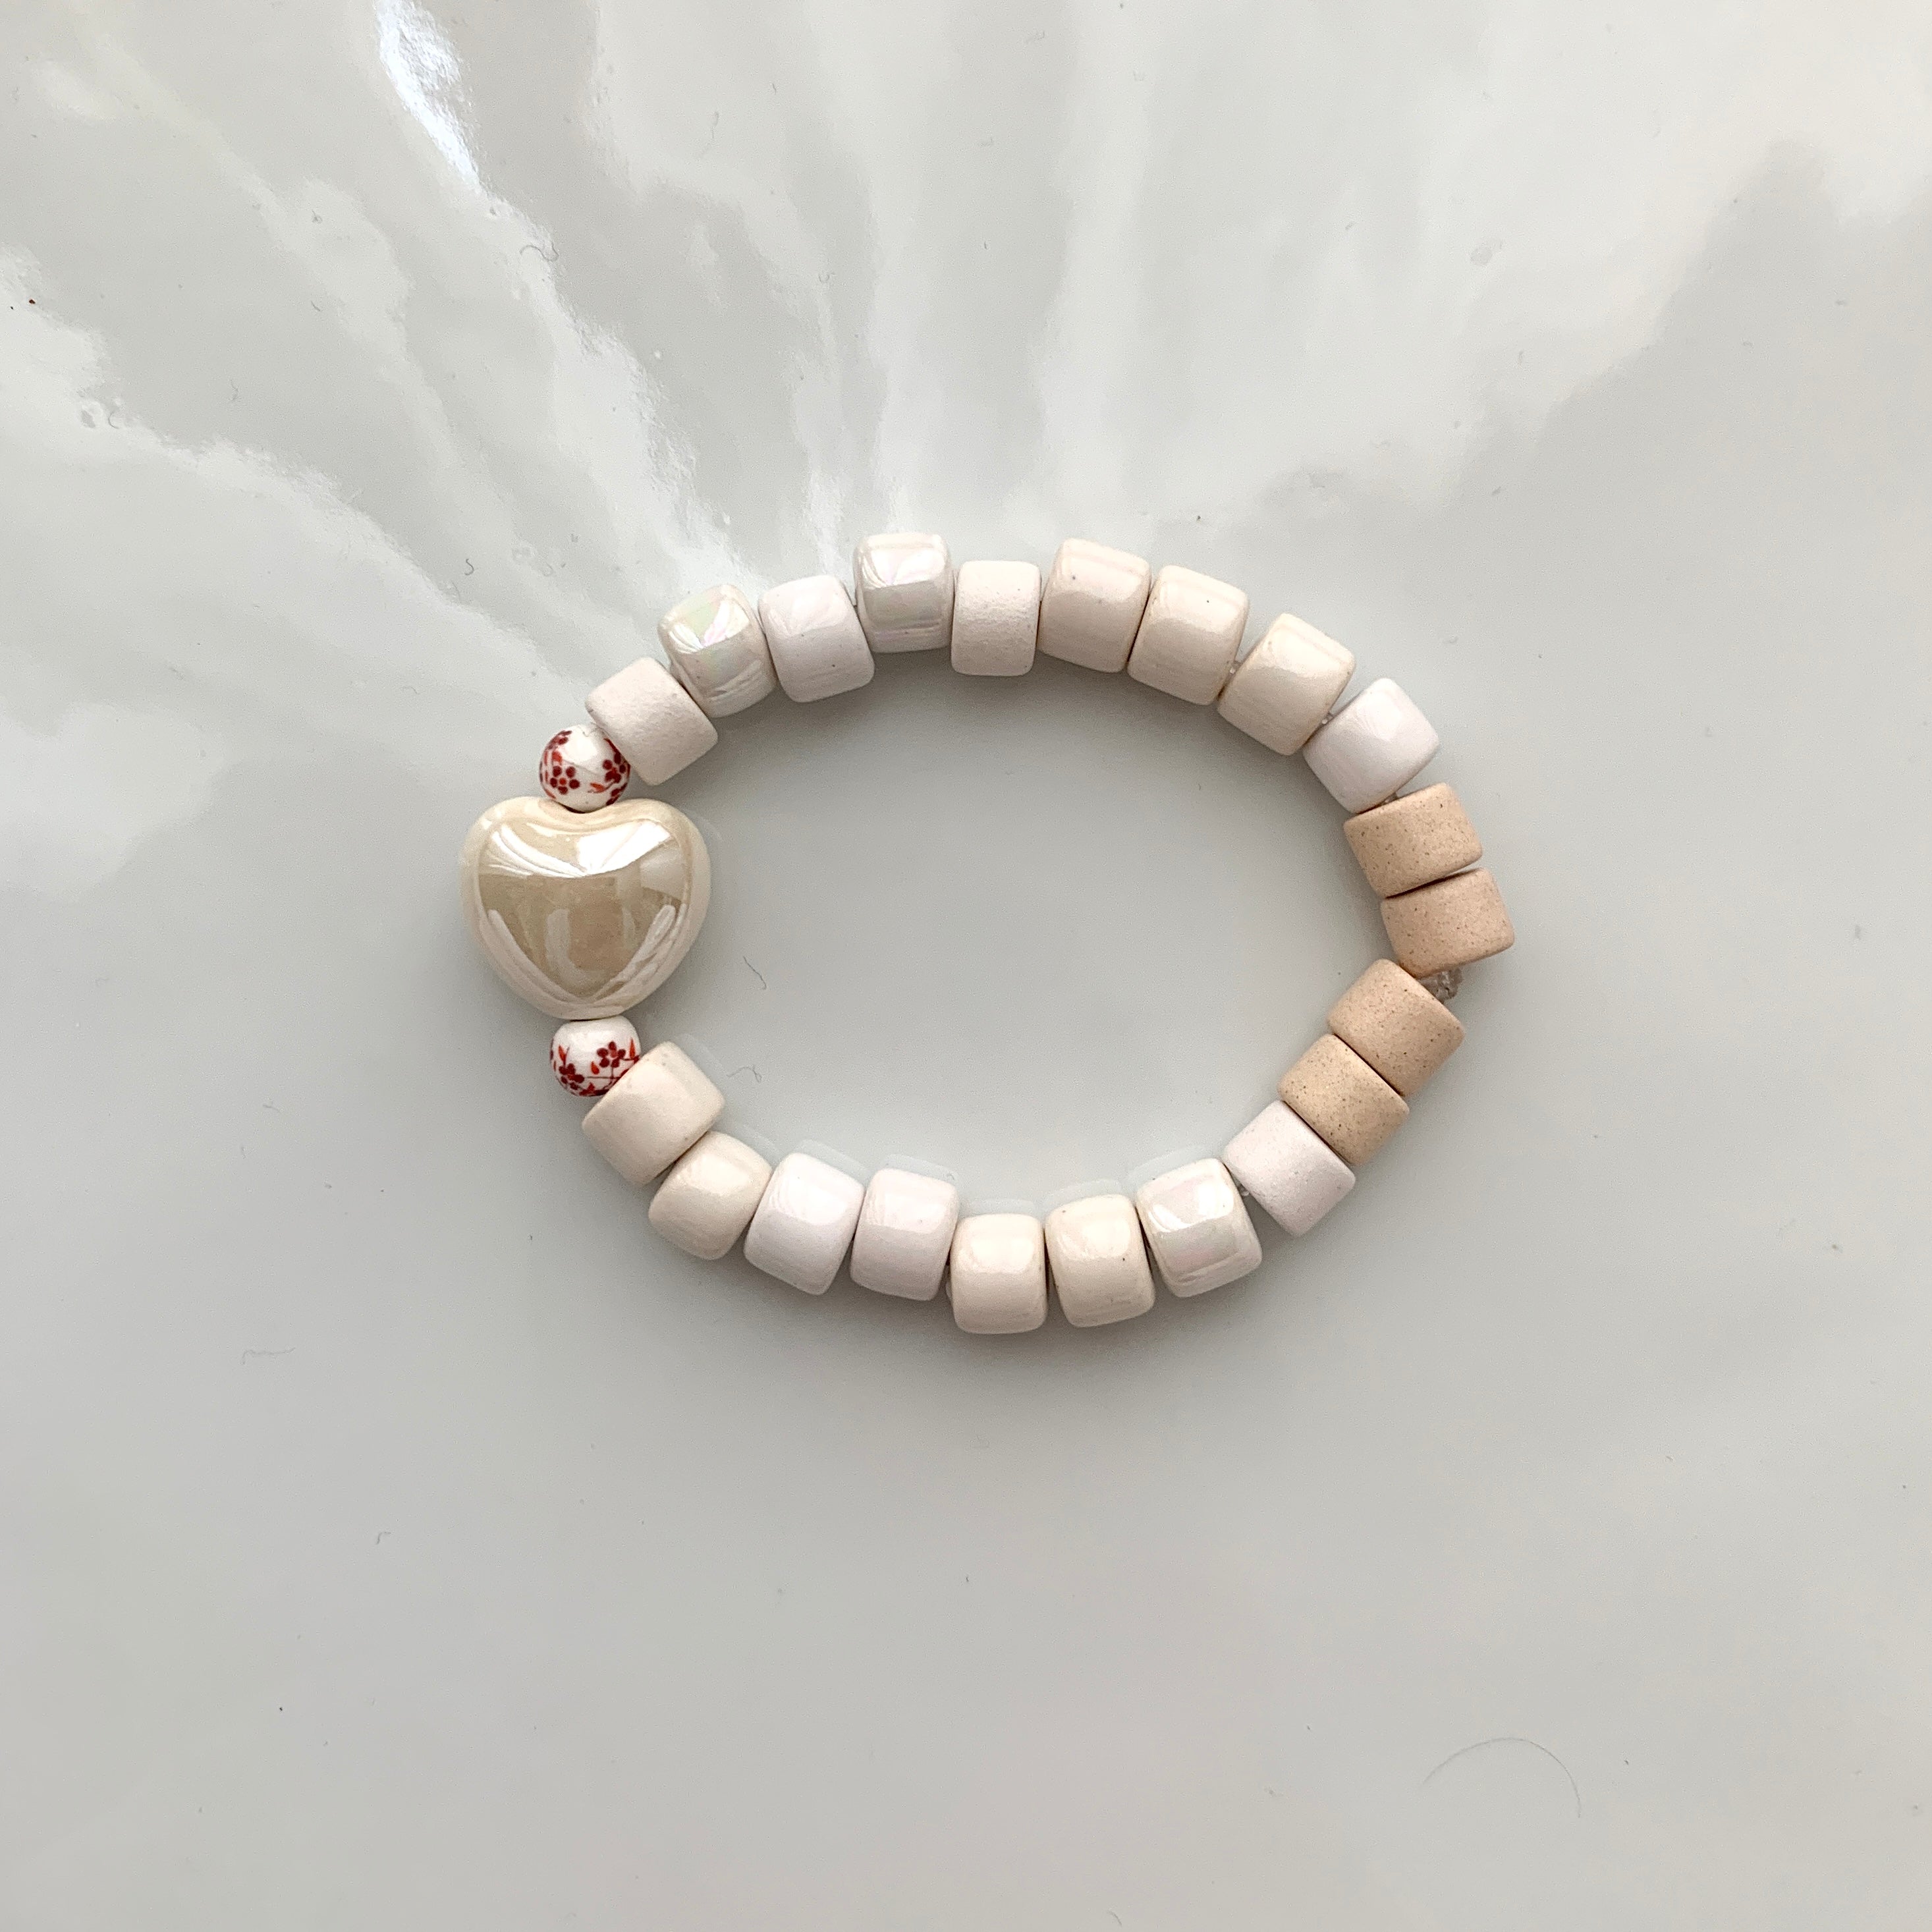 Close To My Heart Bracelet - Cream and White